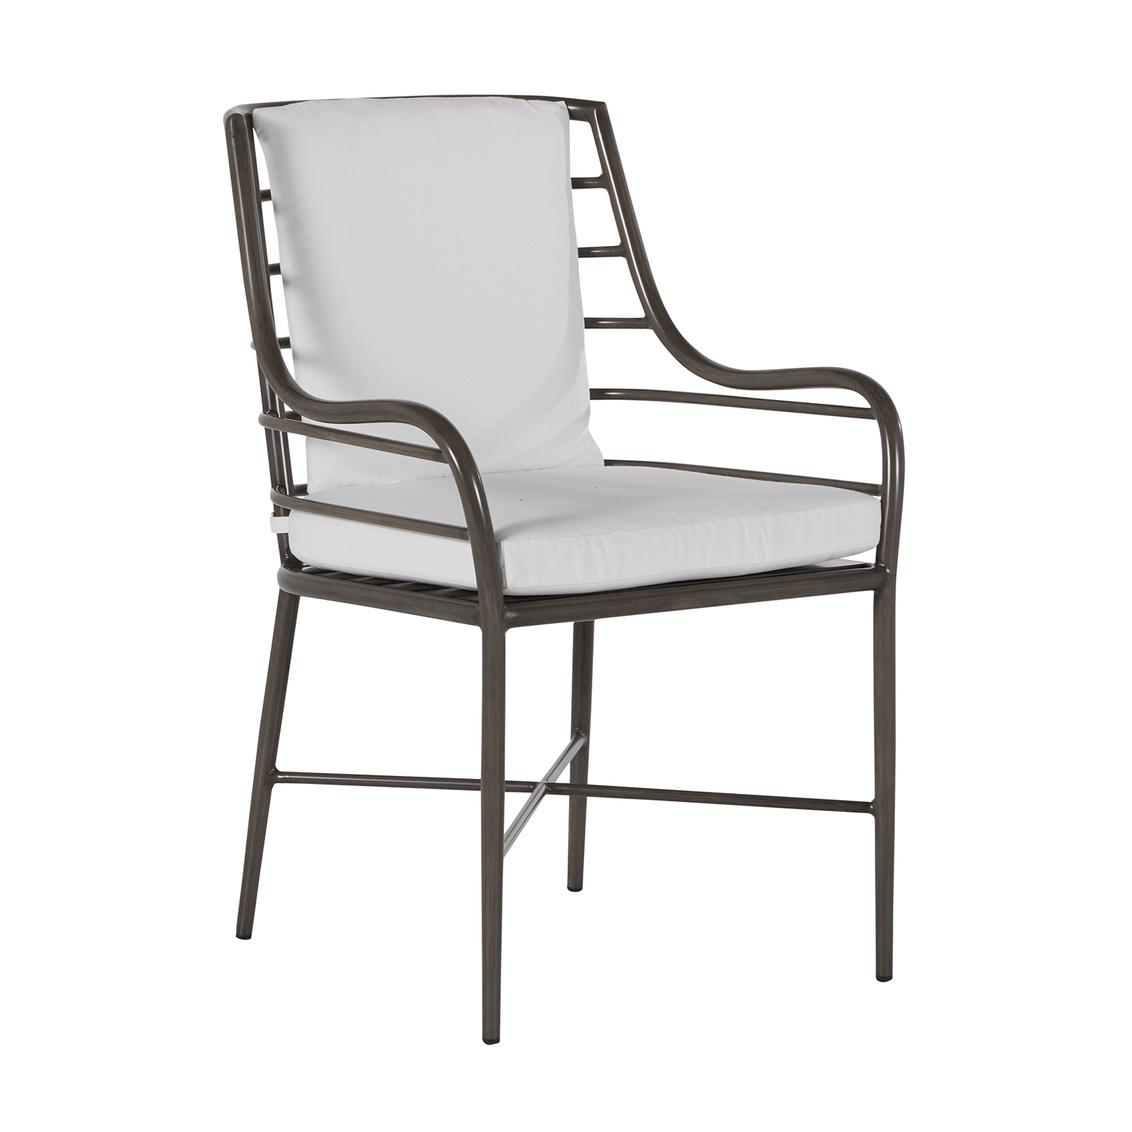 carmel aluminum arm chair in slate grey – frame only product image